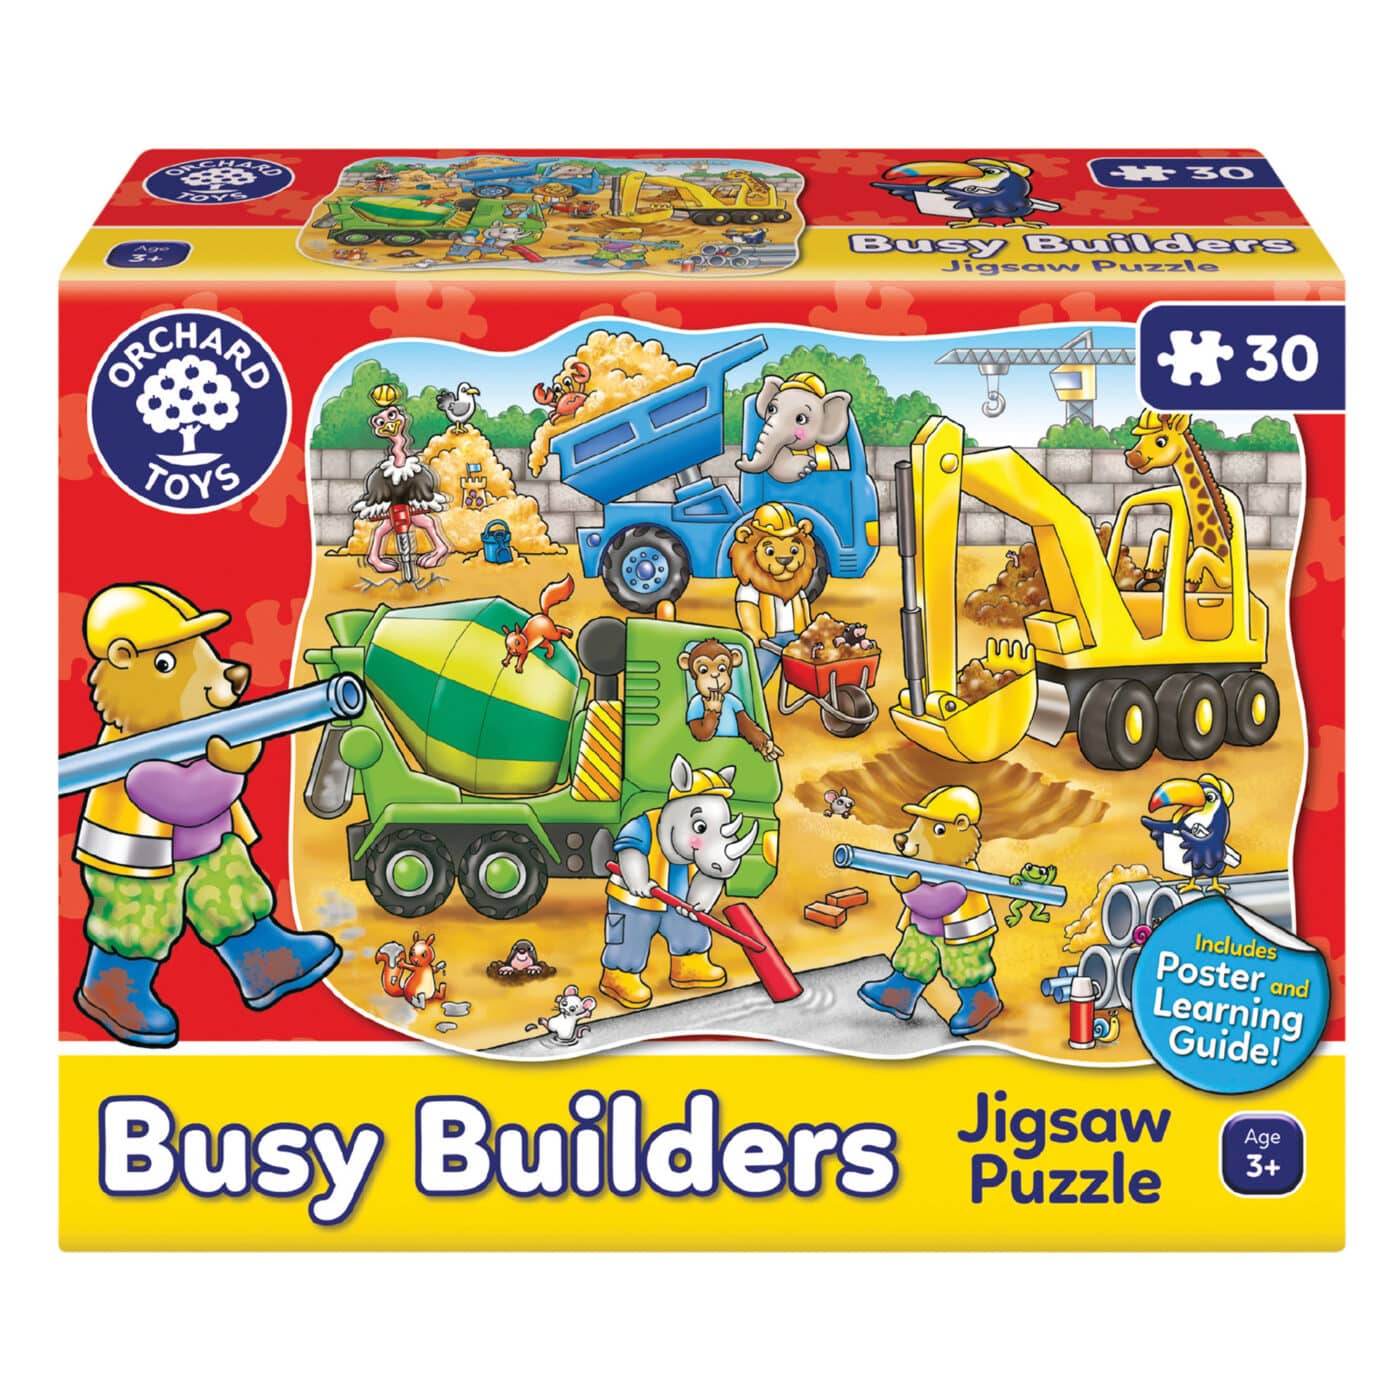 Orchard Toys Busy Builders Jigsaw Puzzle